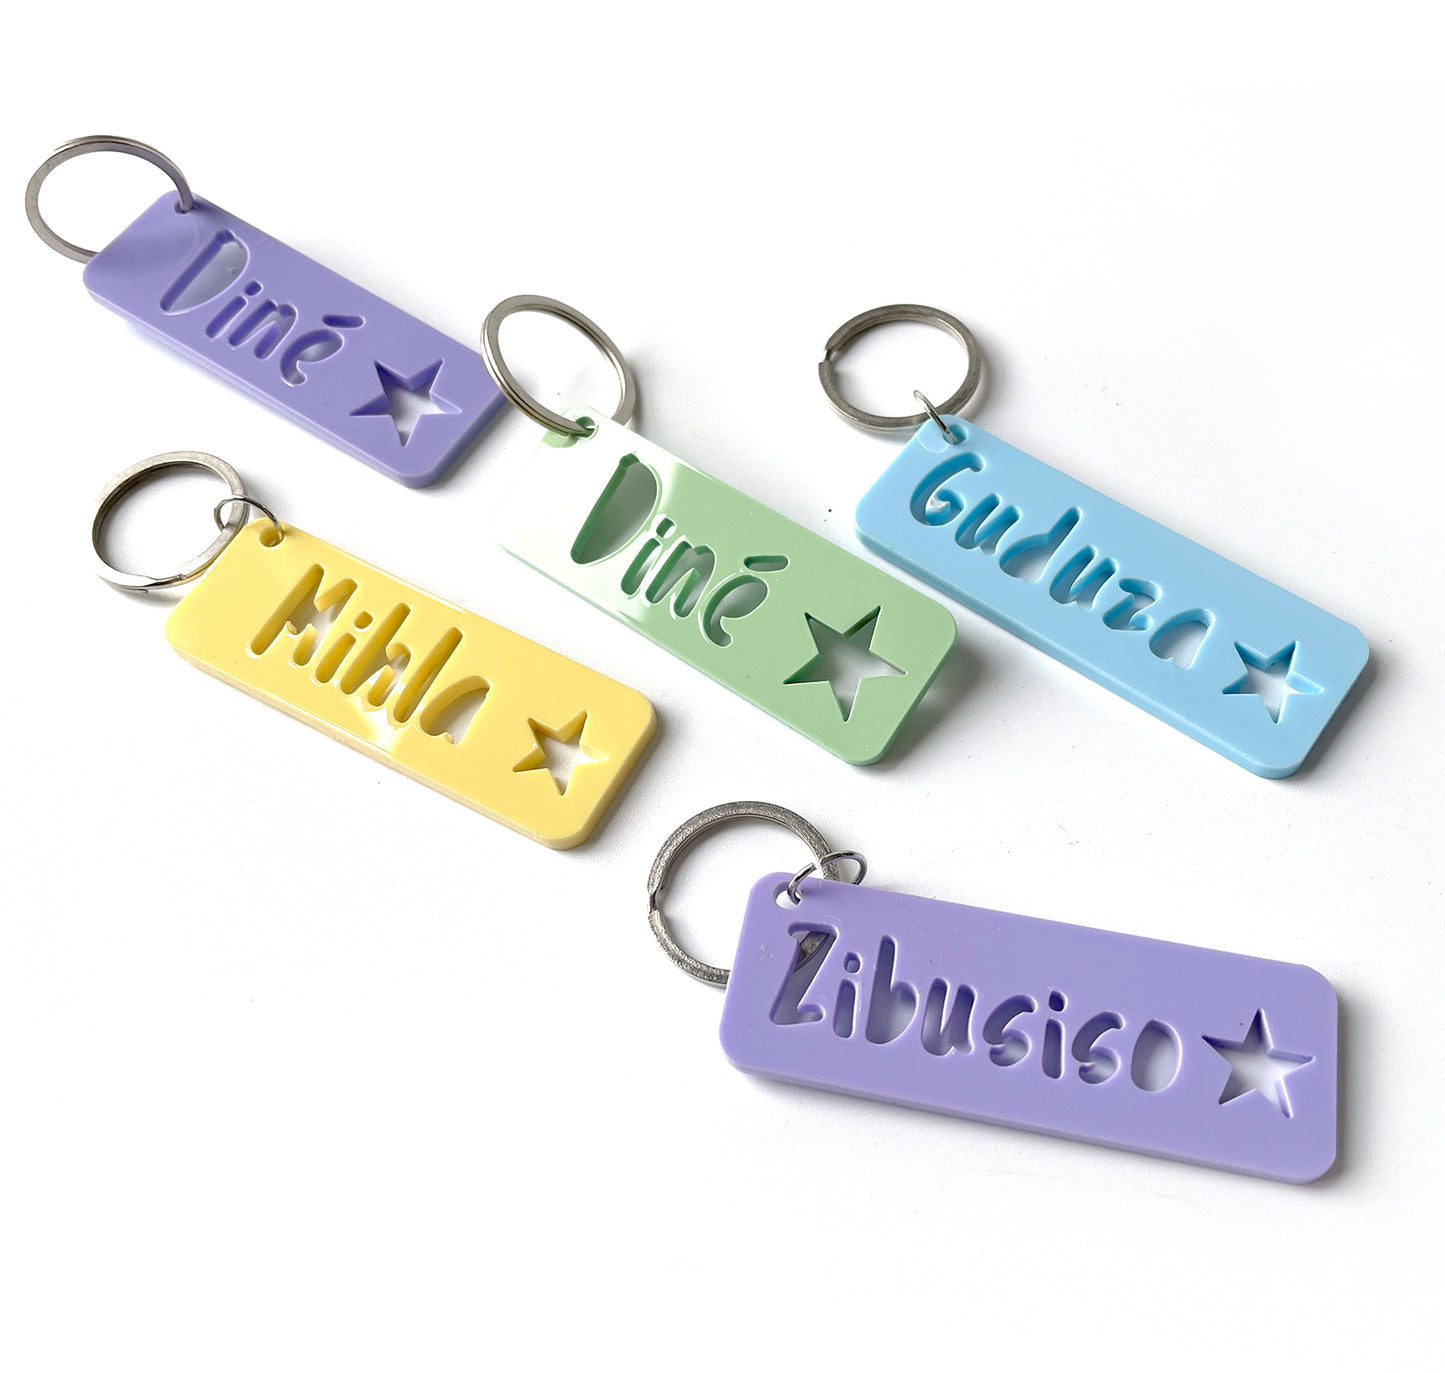 Perspex keyring personalised with any name; Personalised bag tags